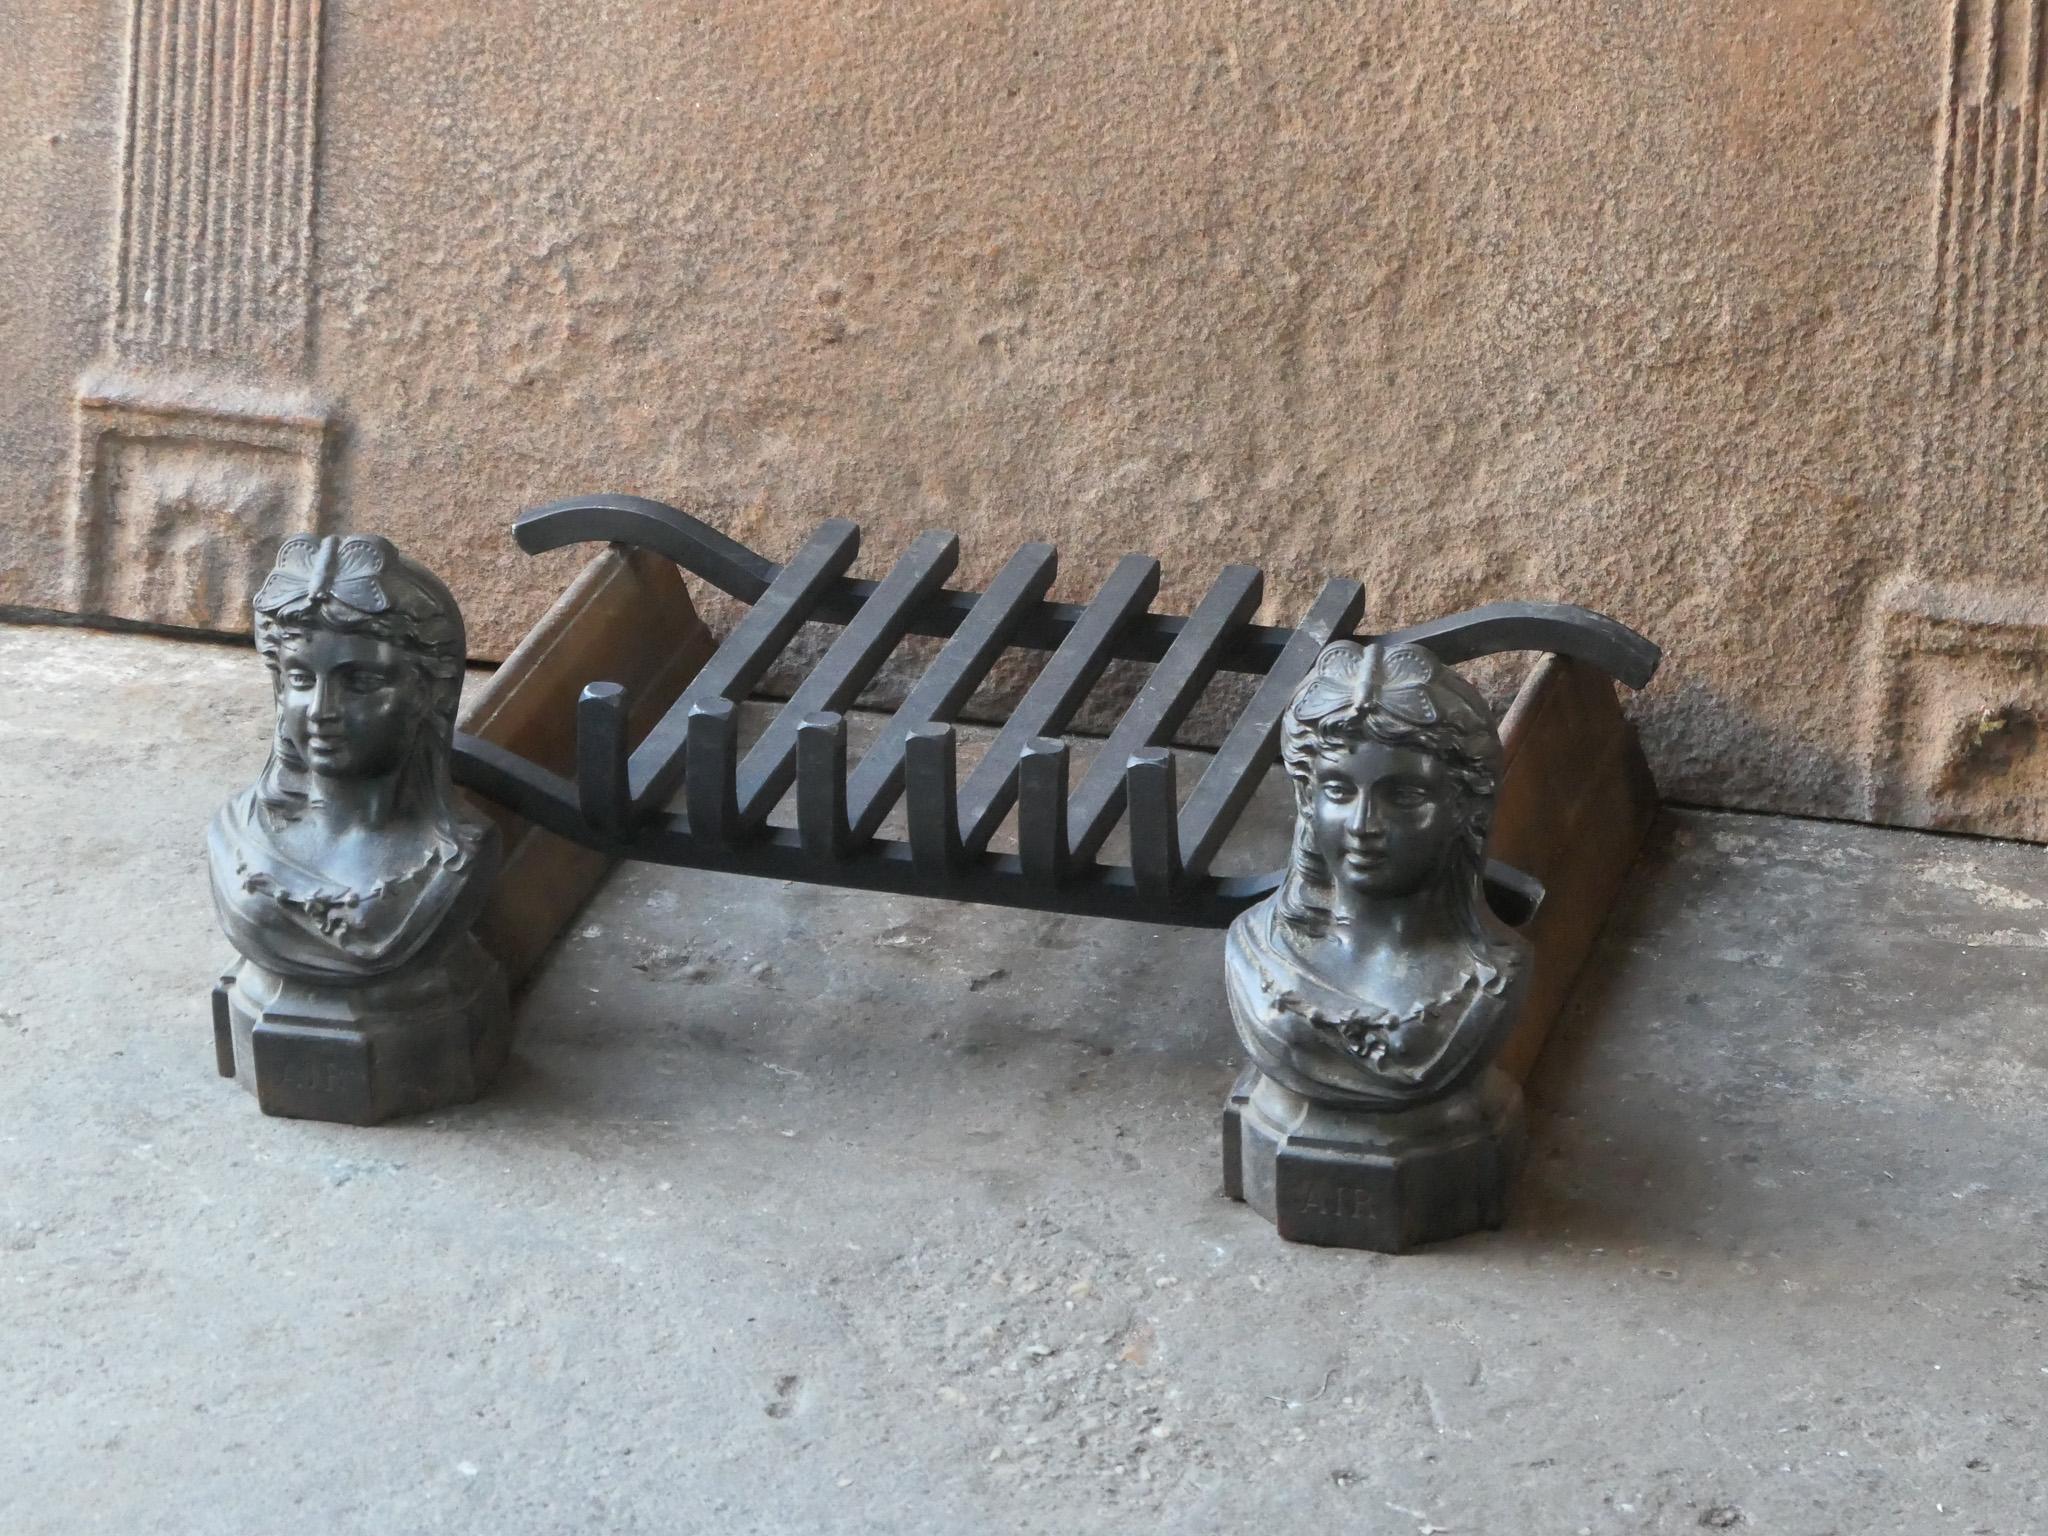 Antique French Napoleon III Fire Grate, Fireplace Grate, 19th Century For Sale 1